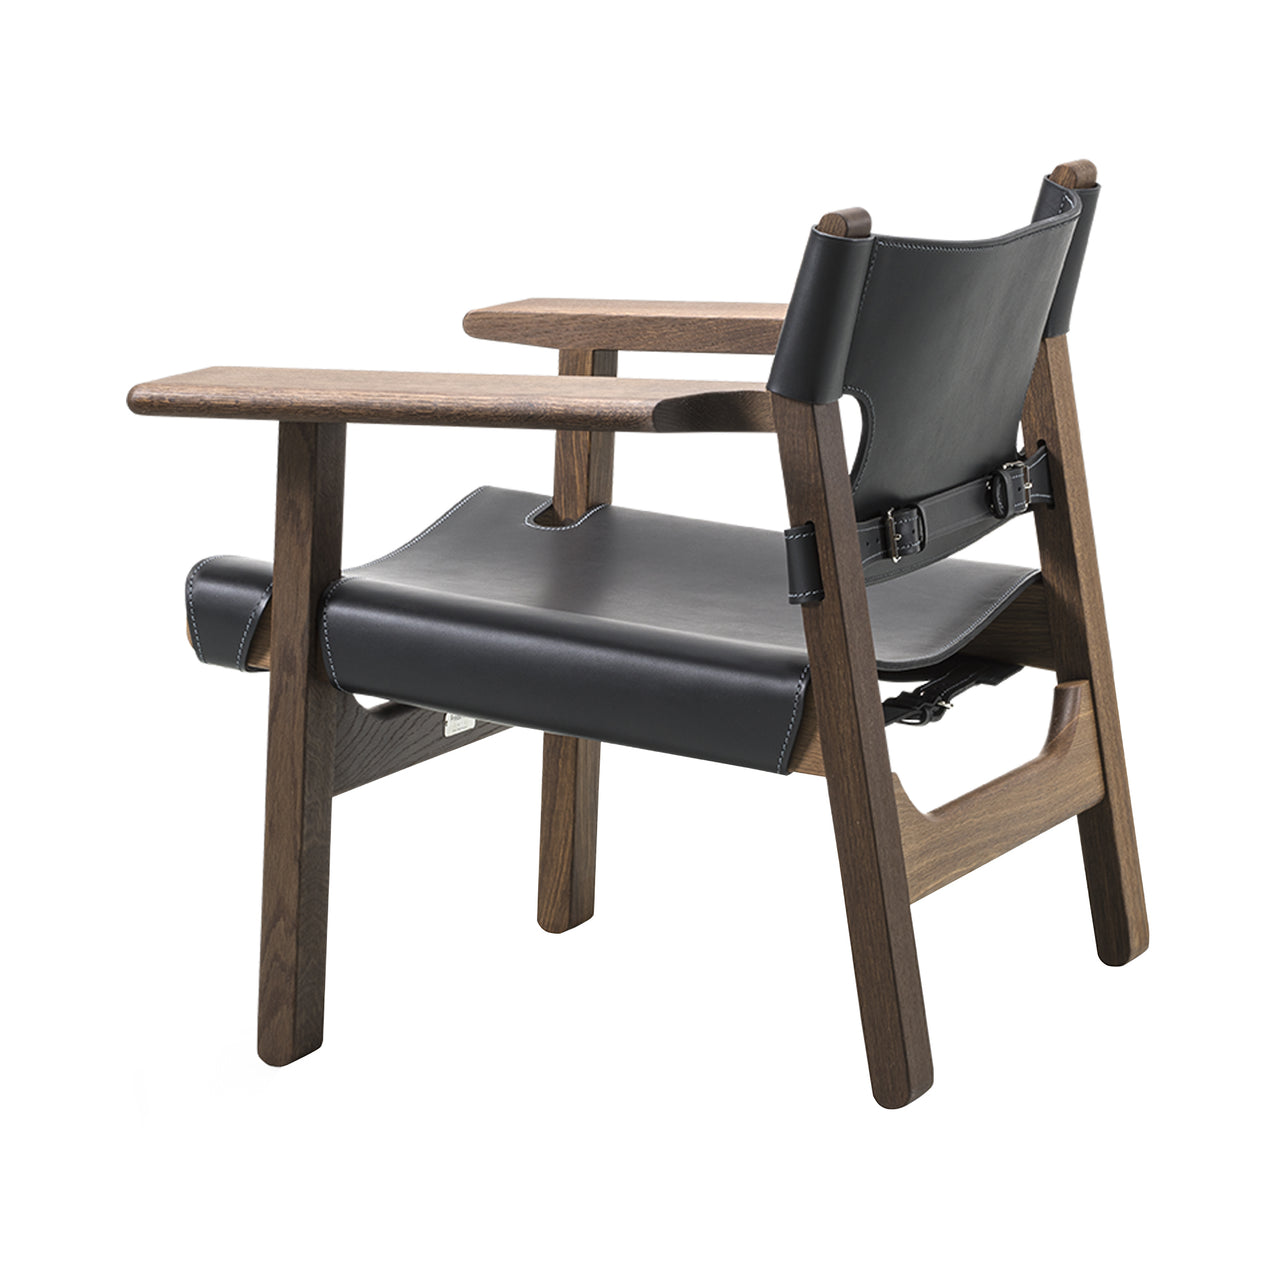 The Spanish Chair: Smoked Oiled Oak + Black